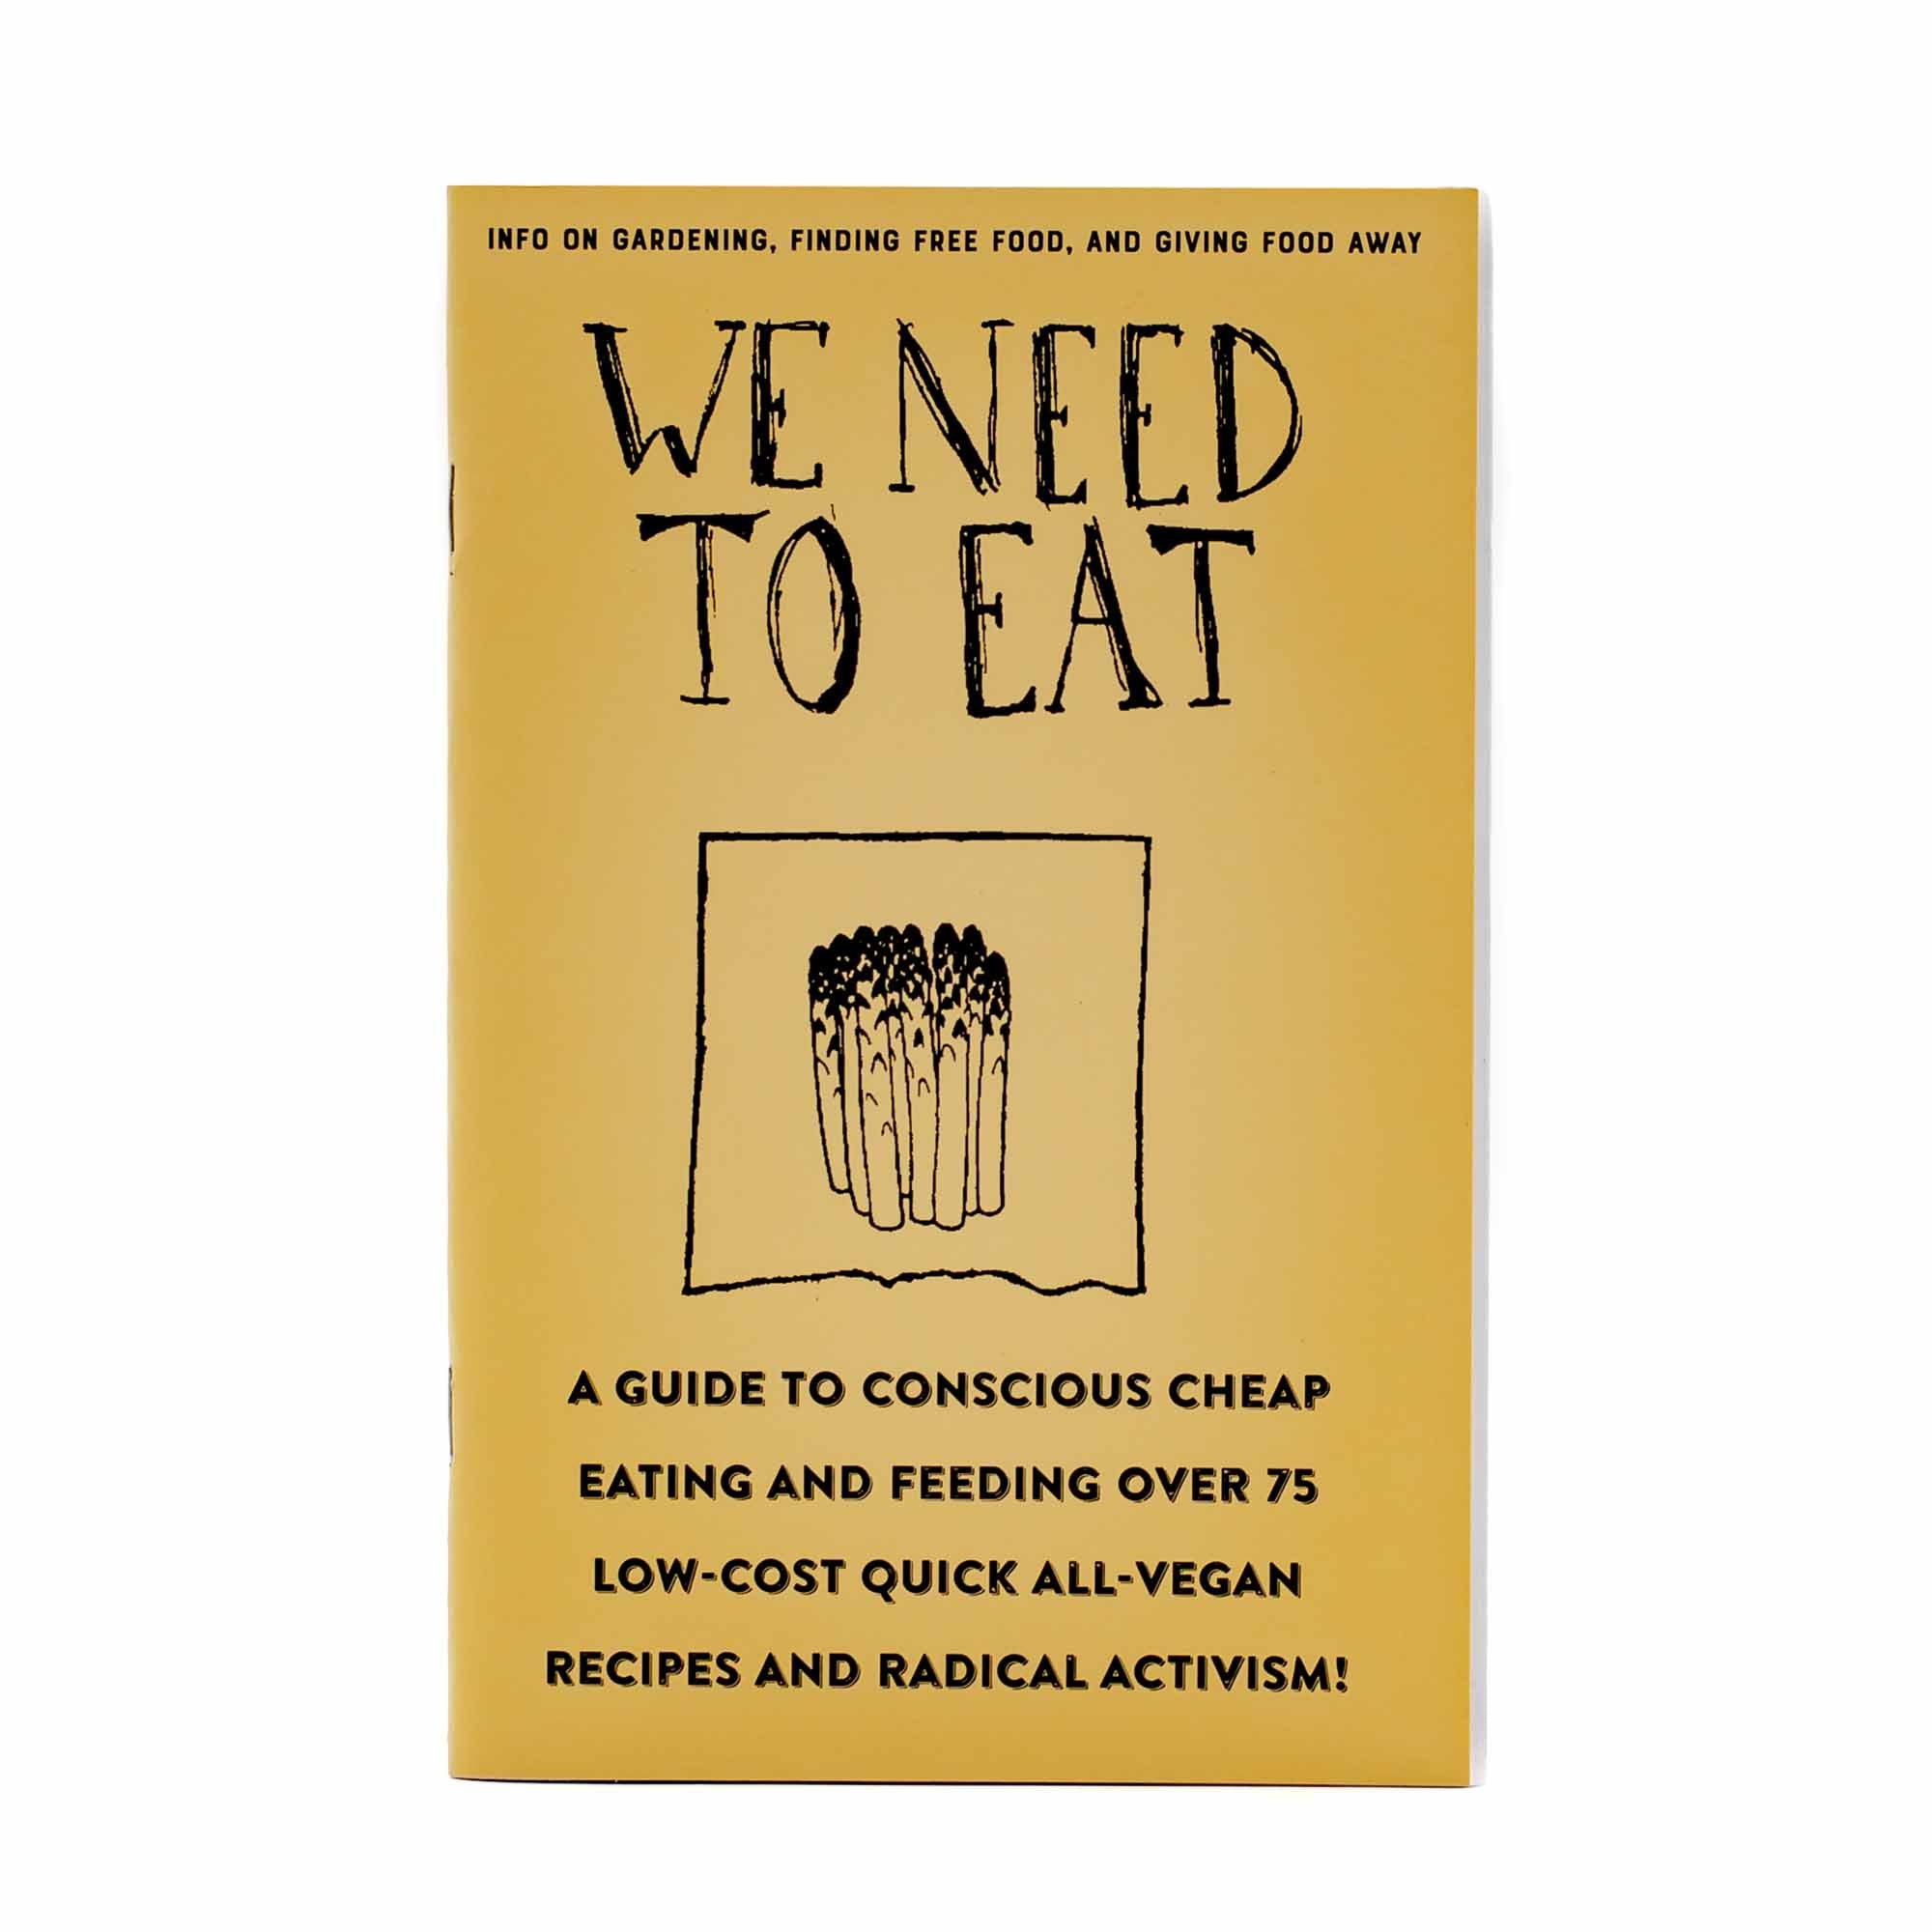 We Need to Eat: A Guide to Conscious Cheap Eating and Feeding Over 75 Low-Cost Quick All-vegan Recipes and Radical Activism! - Mortise And Tenon